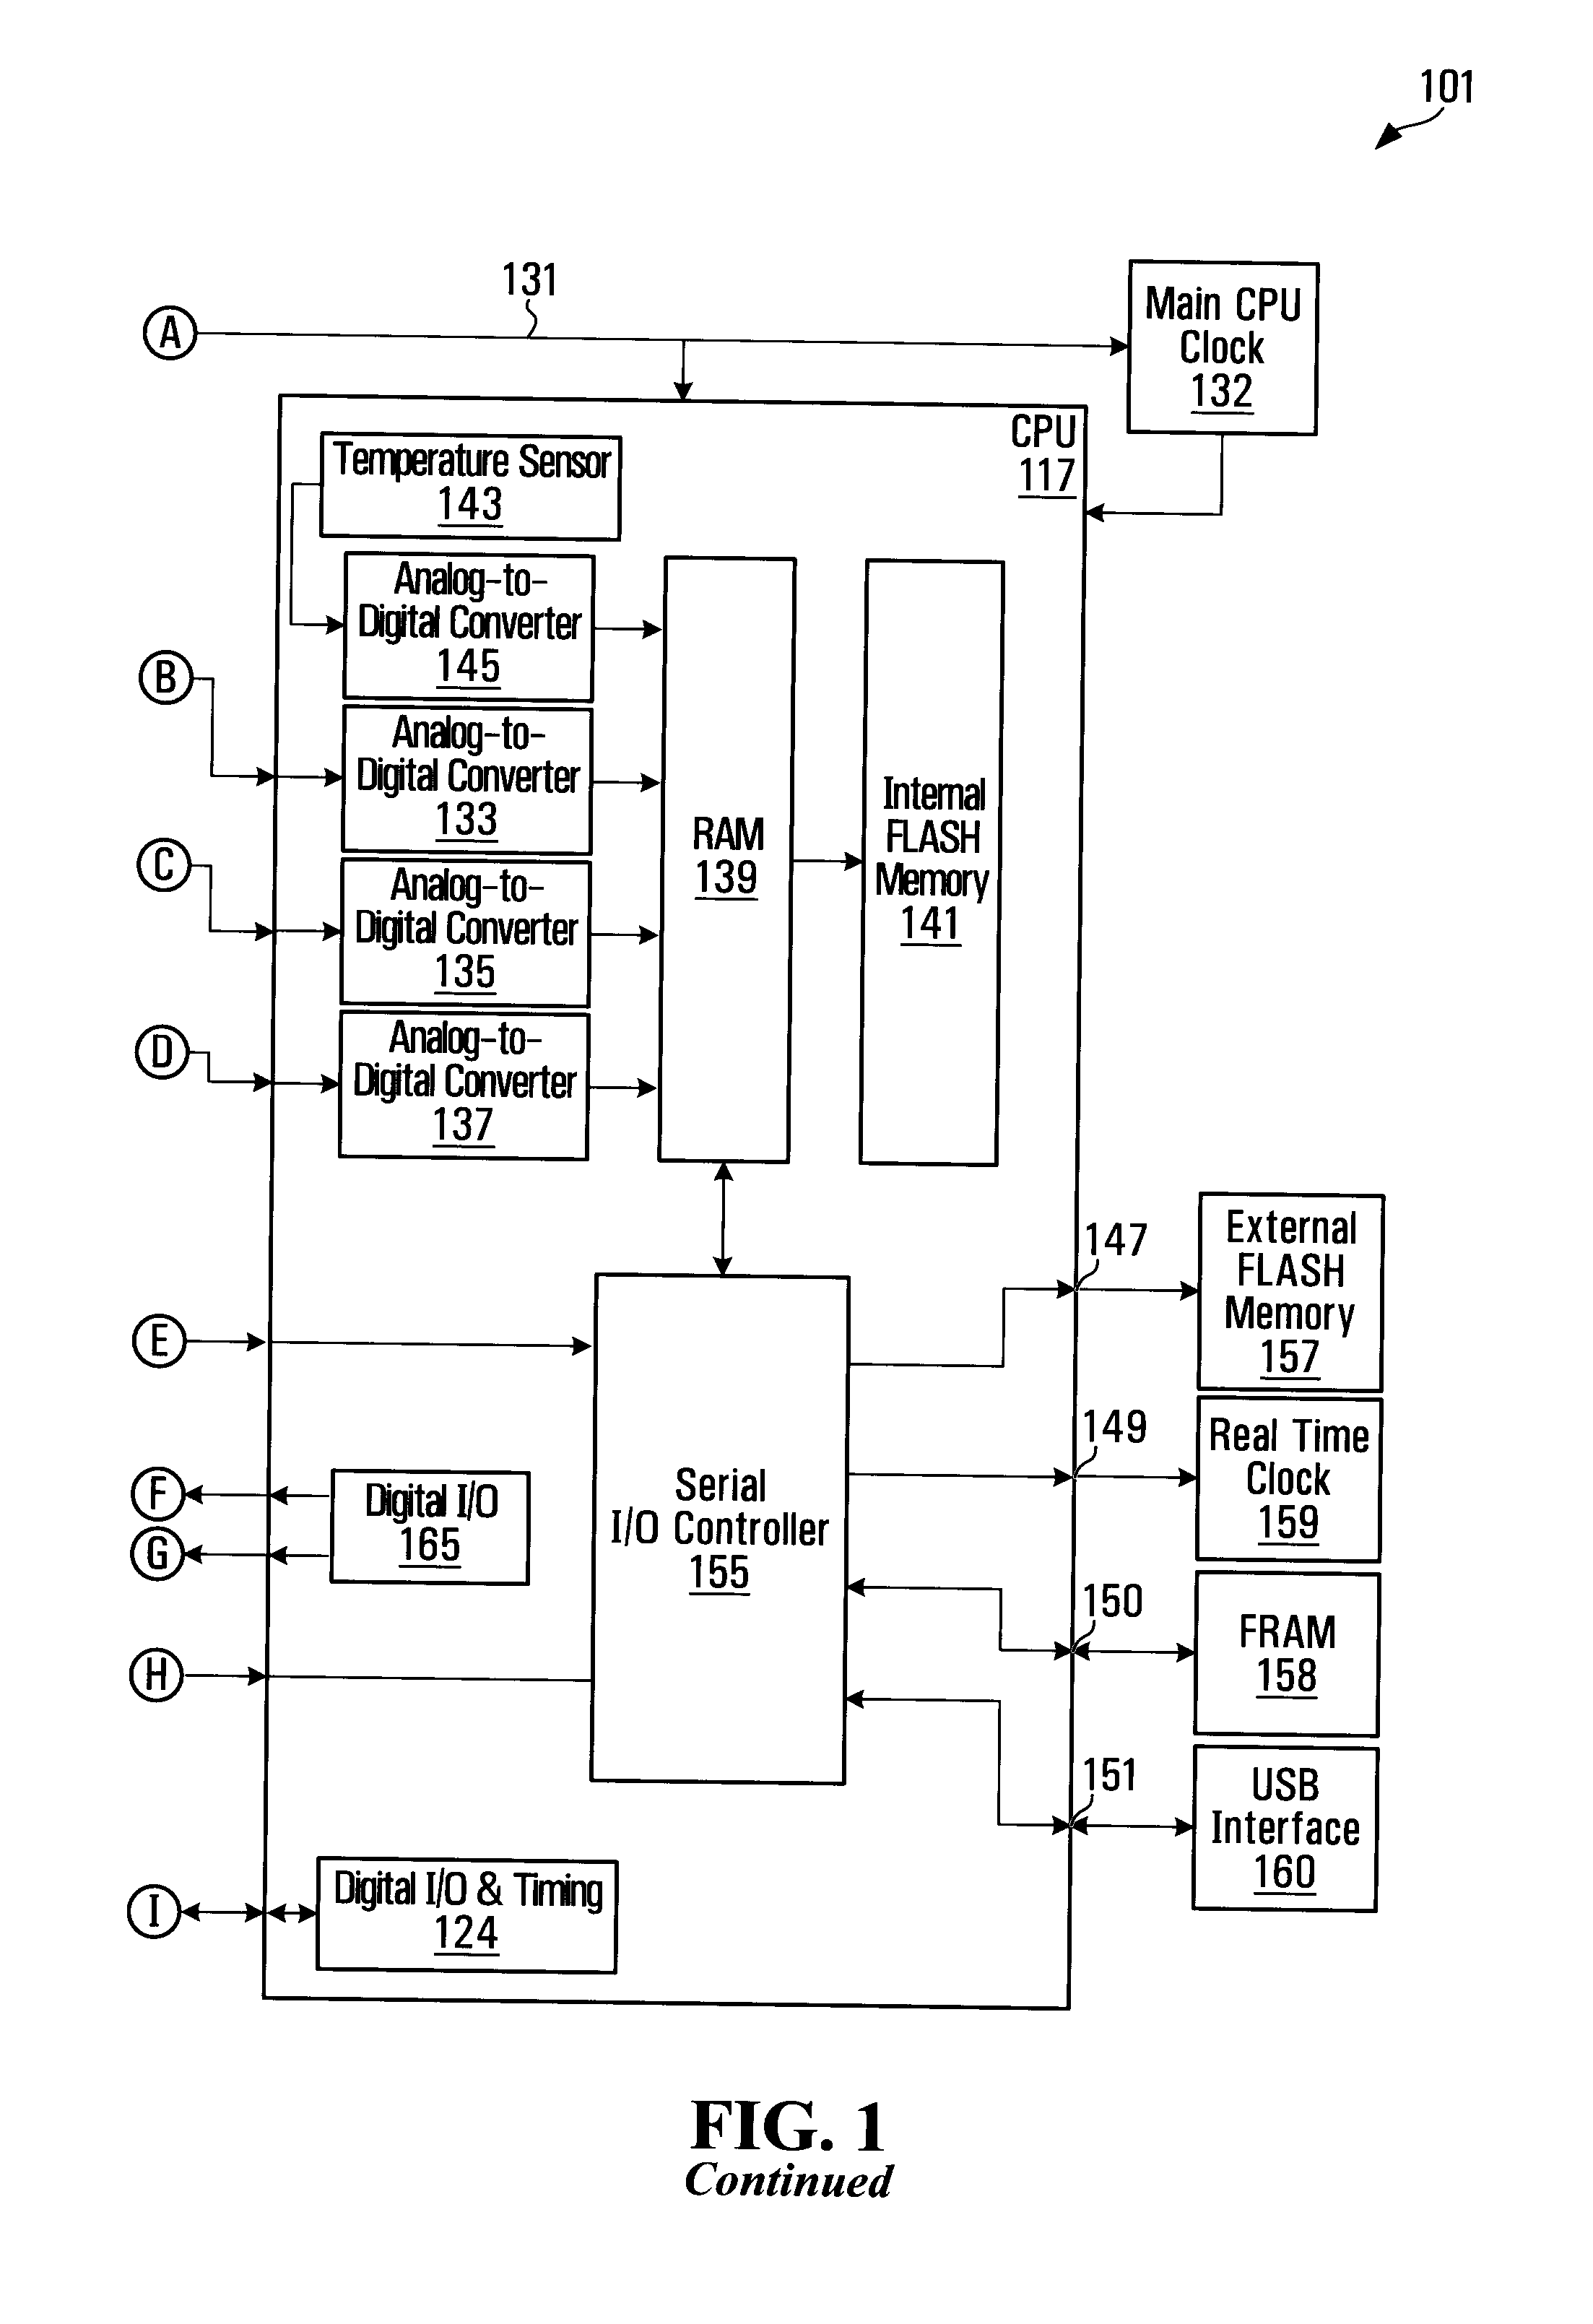 Apparatus and Method for Measuring and Recording Data from Violent Events